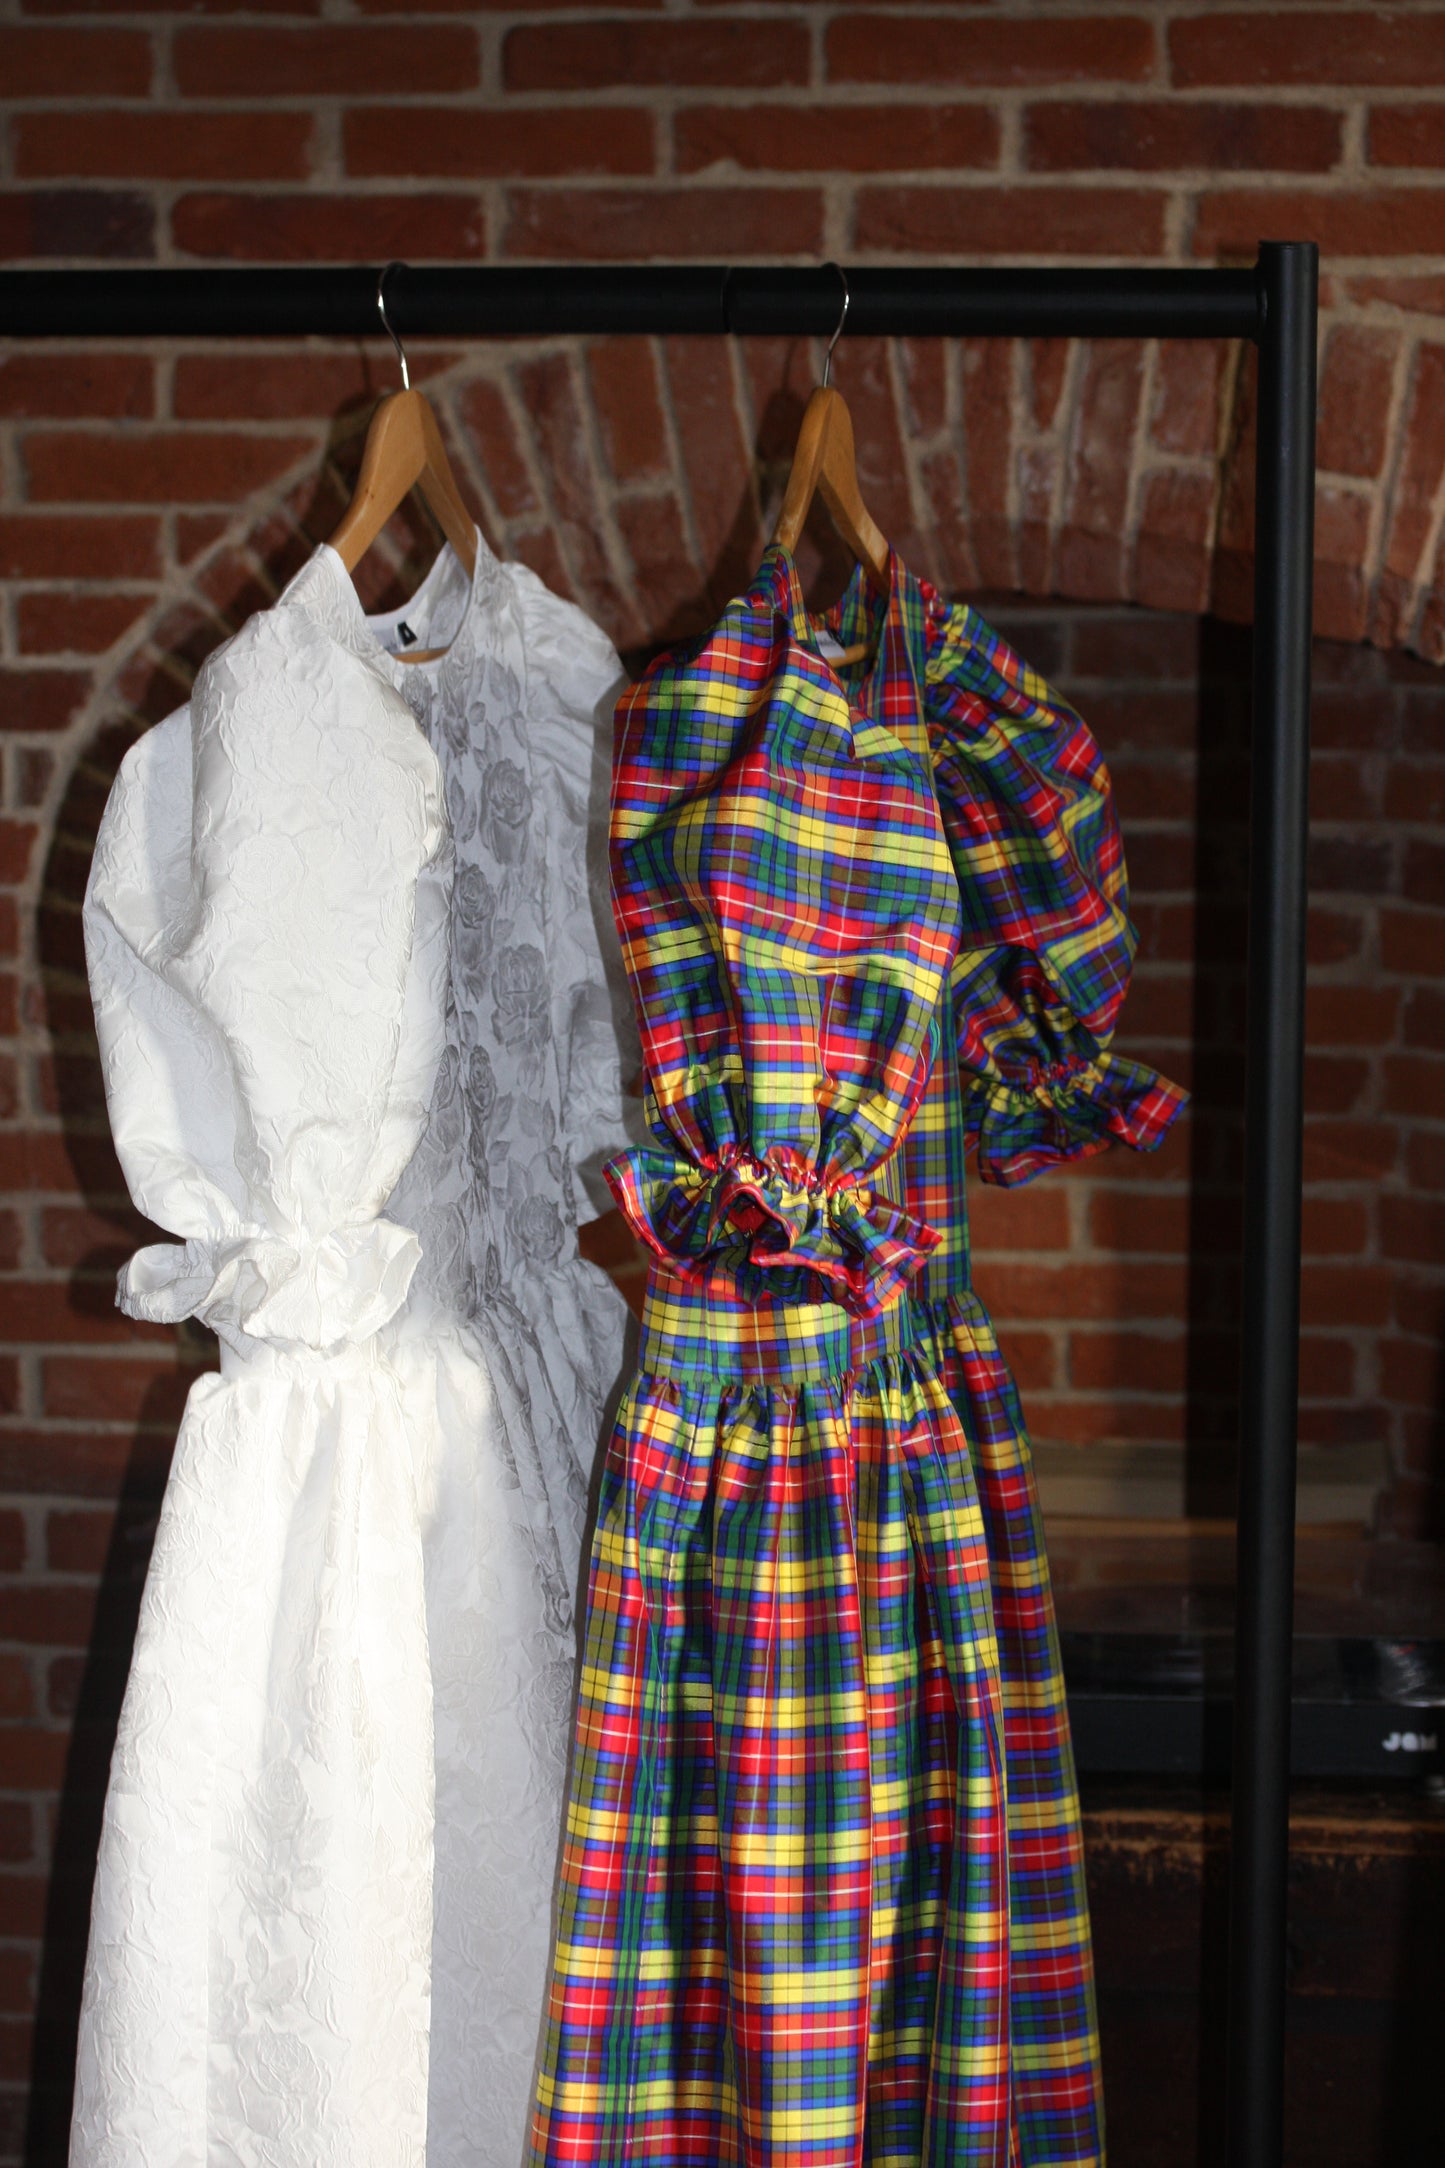 Romantic and nostalgic and beautiful dream dress in silk tartan and an ex deigned Italian jacquard. Both dresses have large puff sleeves and a full hand gathered tiered skirt